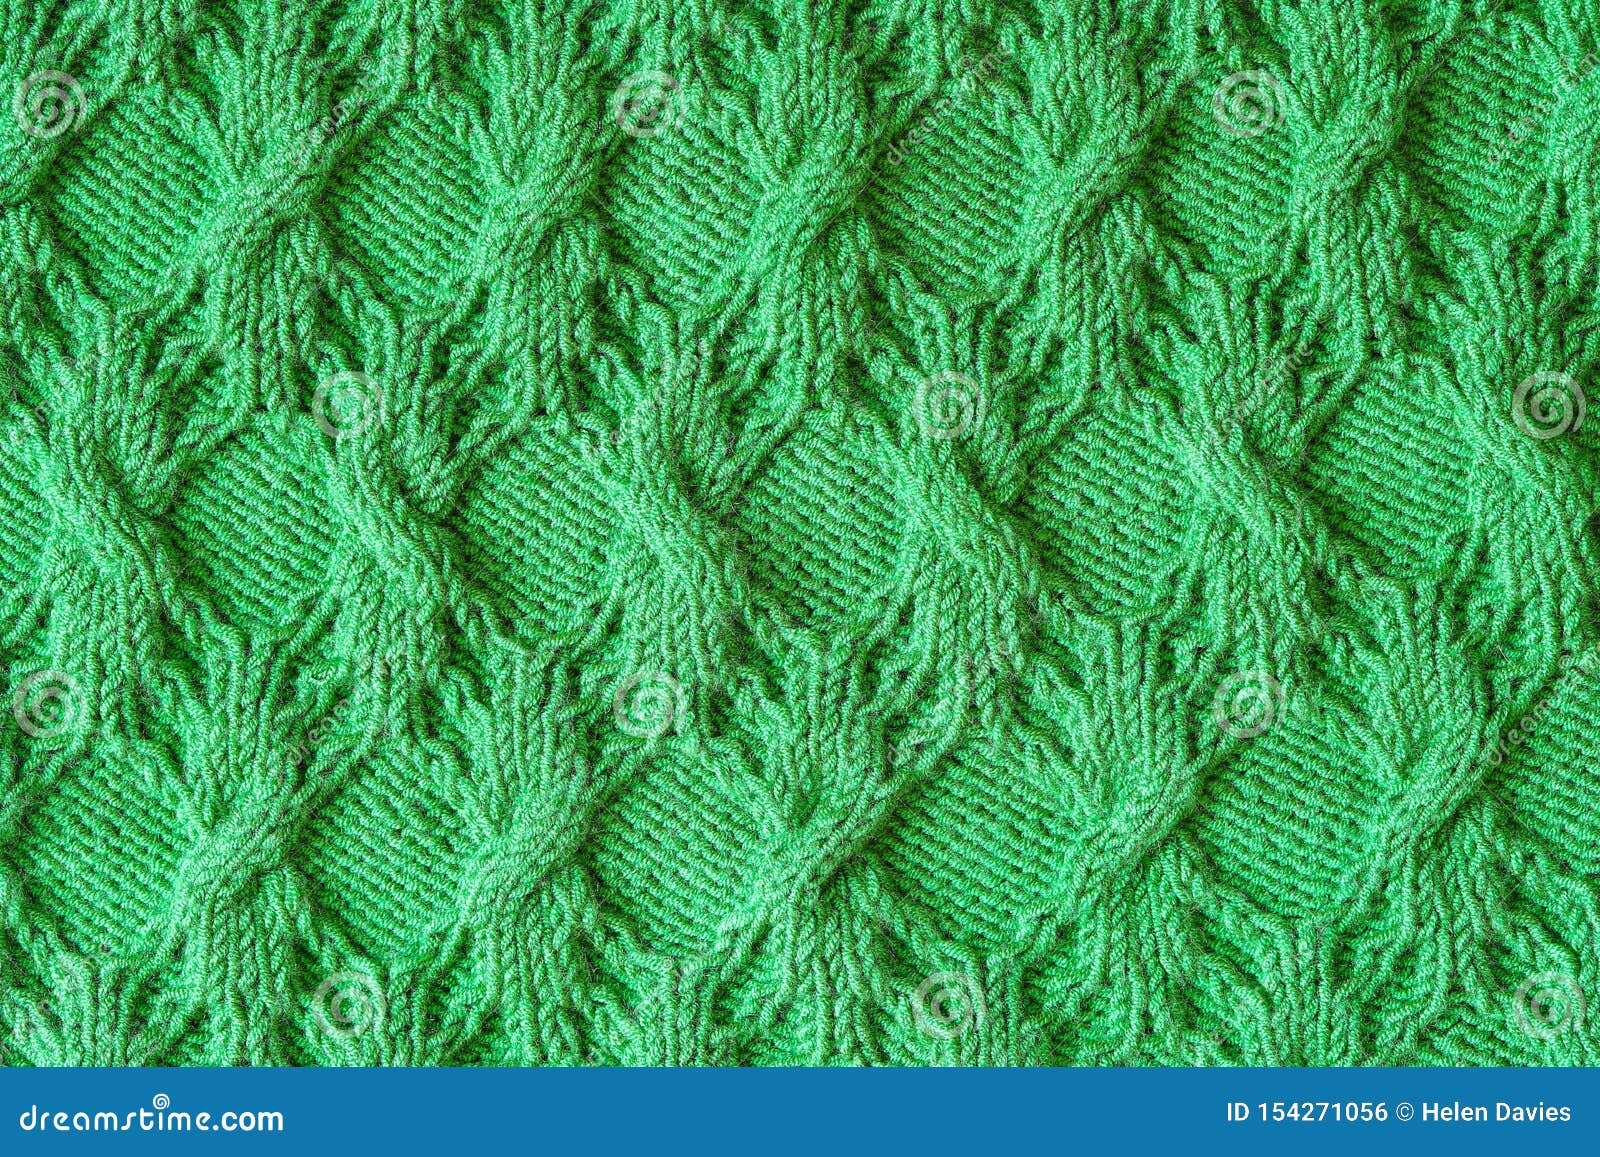 Abstract Textured Background of Green Knitting Stock Photo - Image of ...